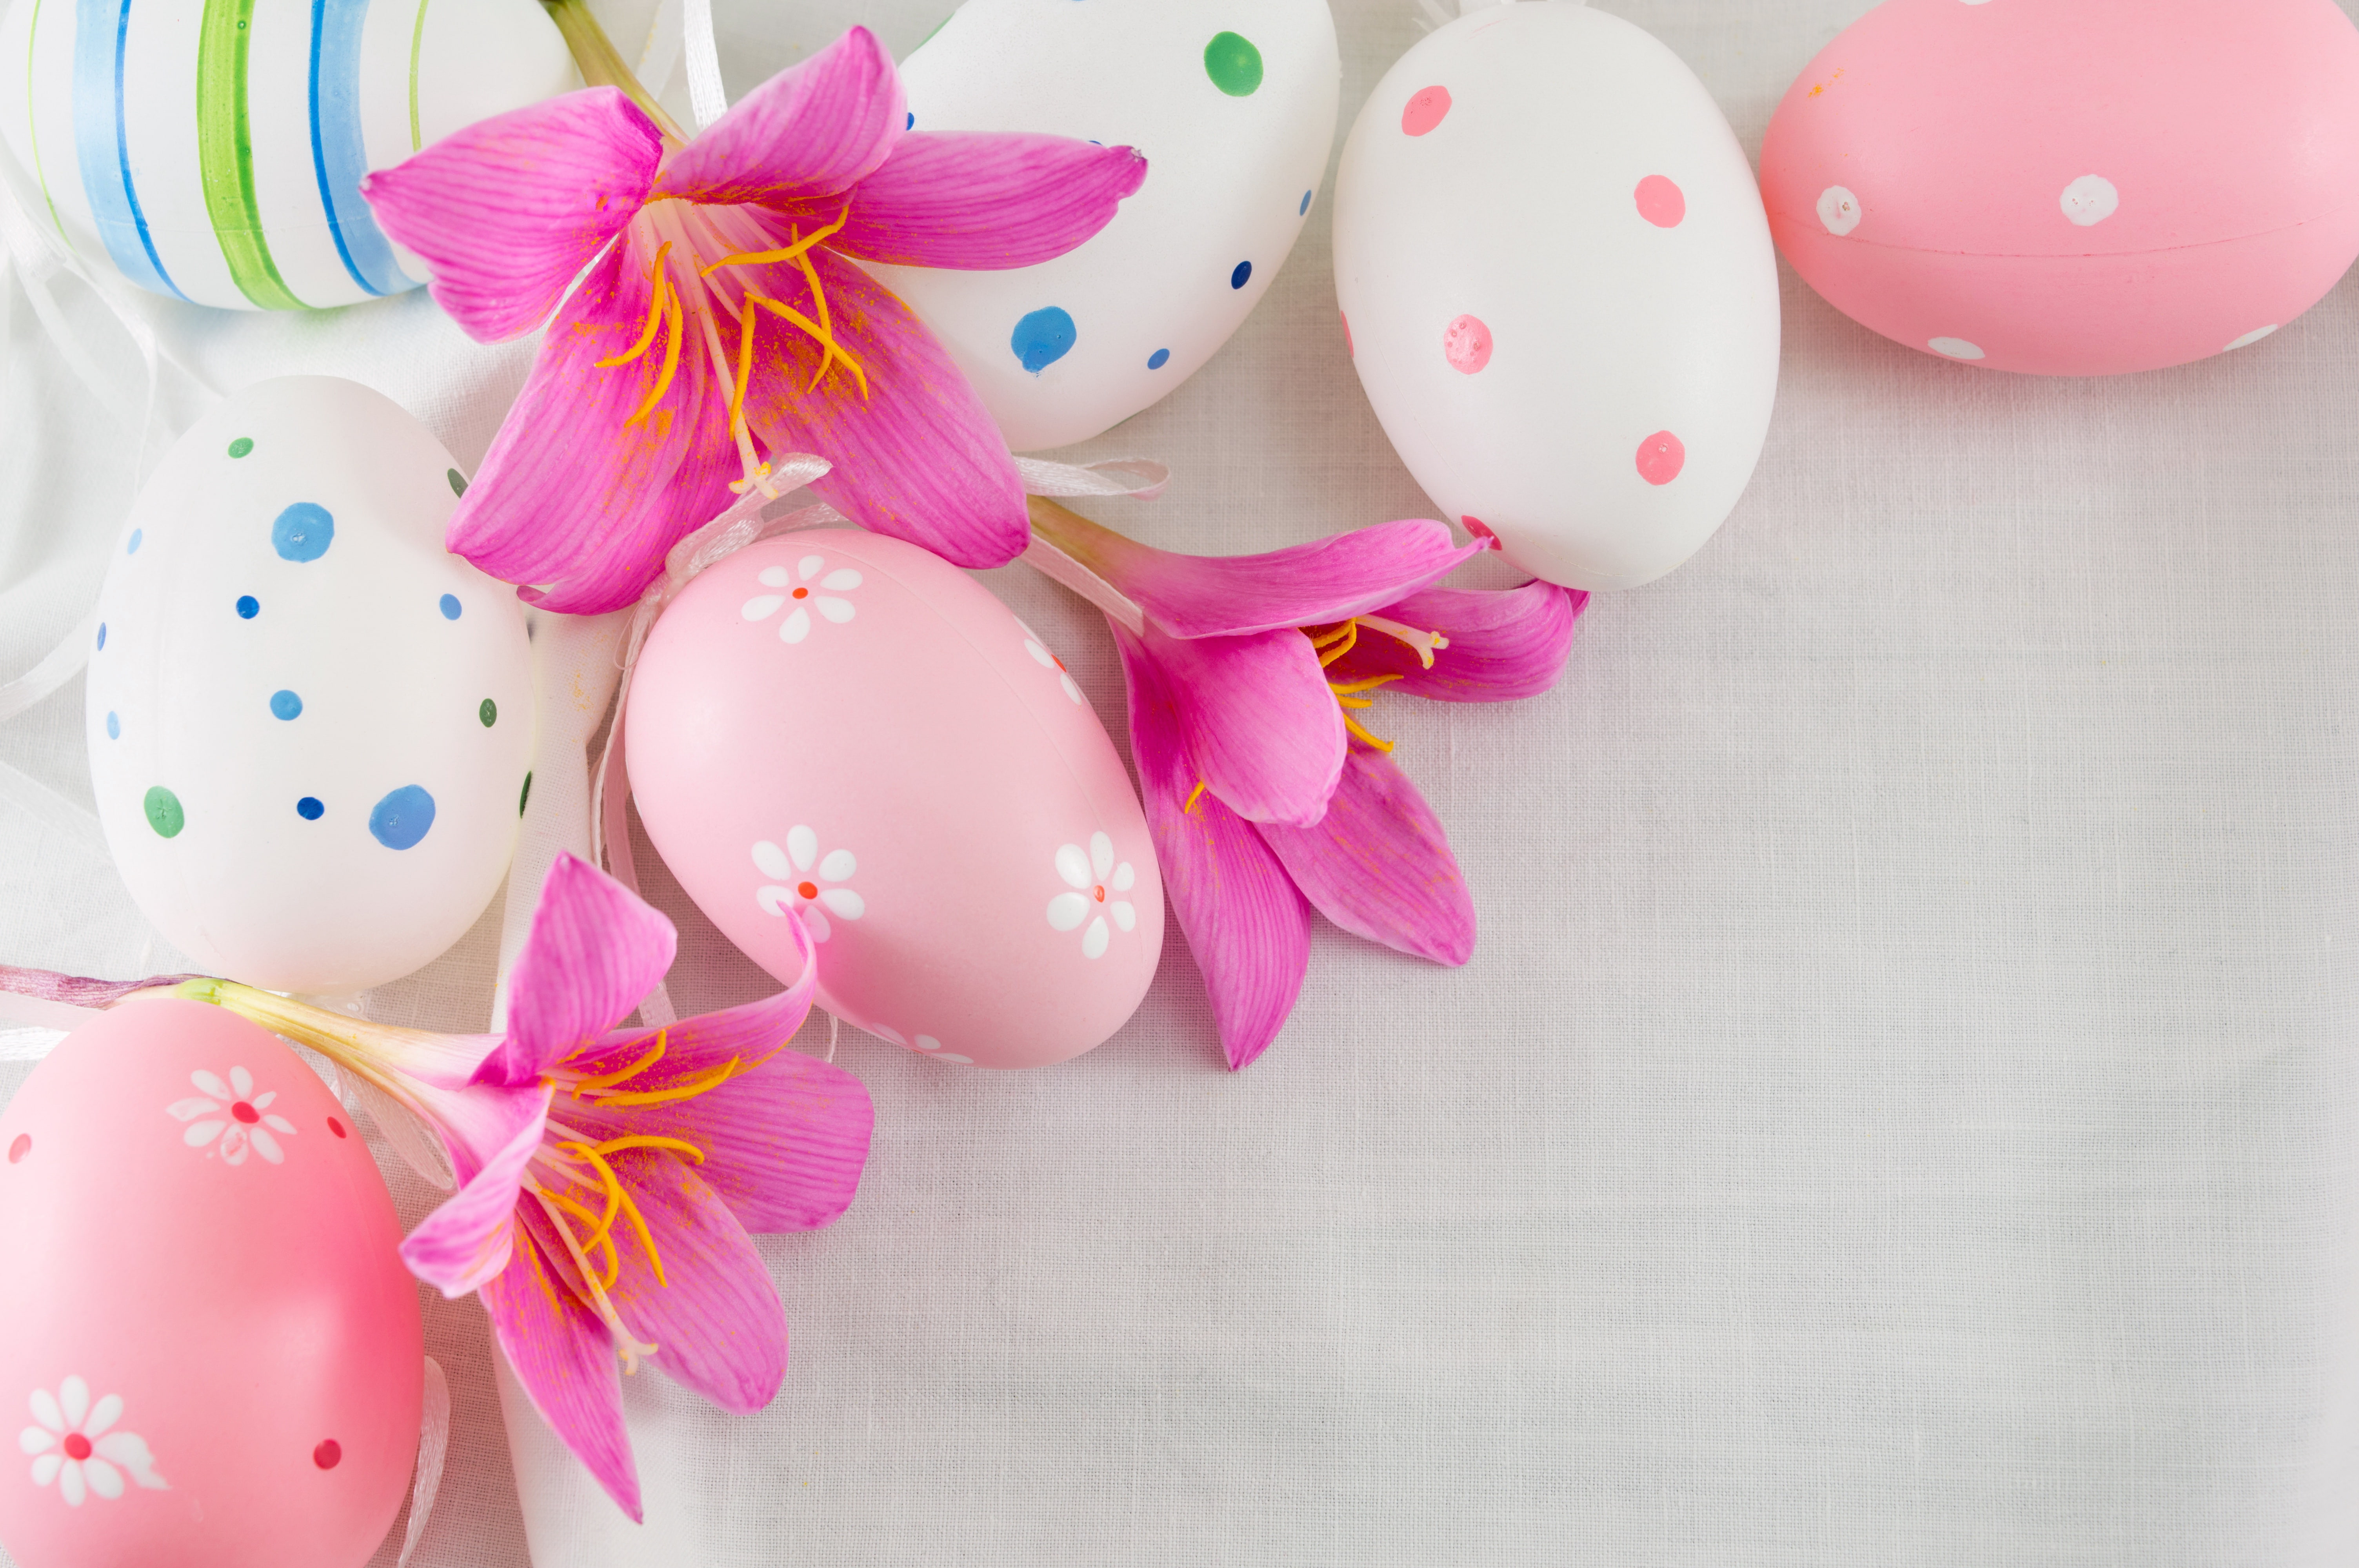 flowers, Easter, pink, spring, eggs, decoration, Happy, the painted eggs